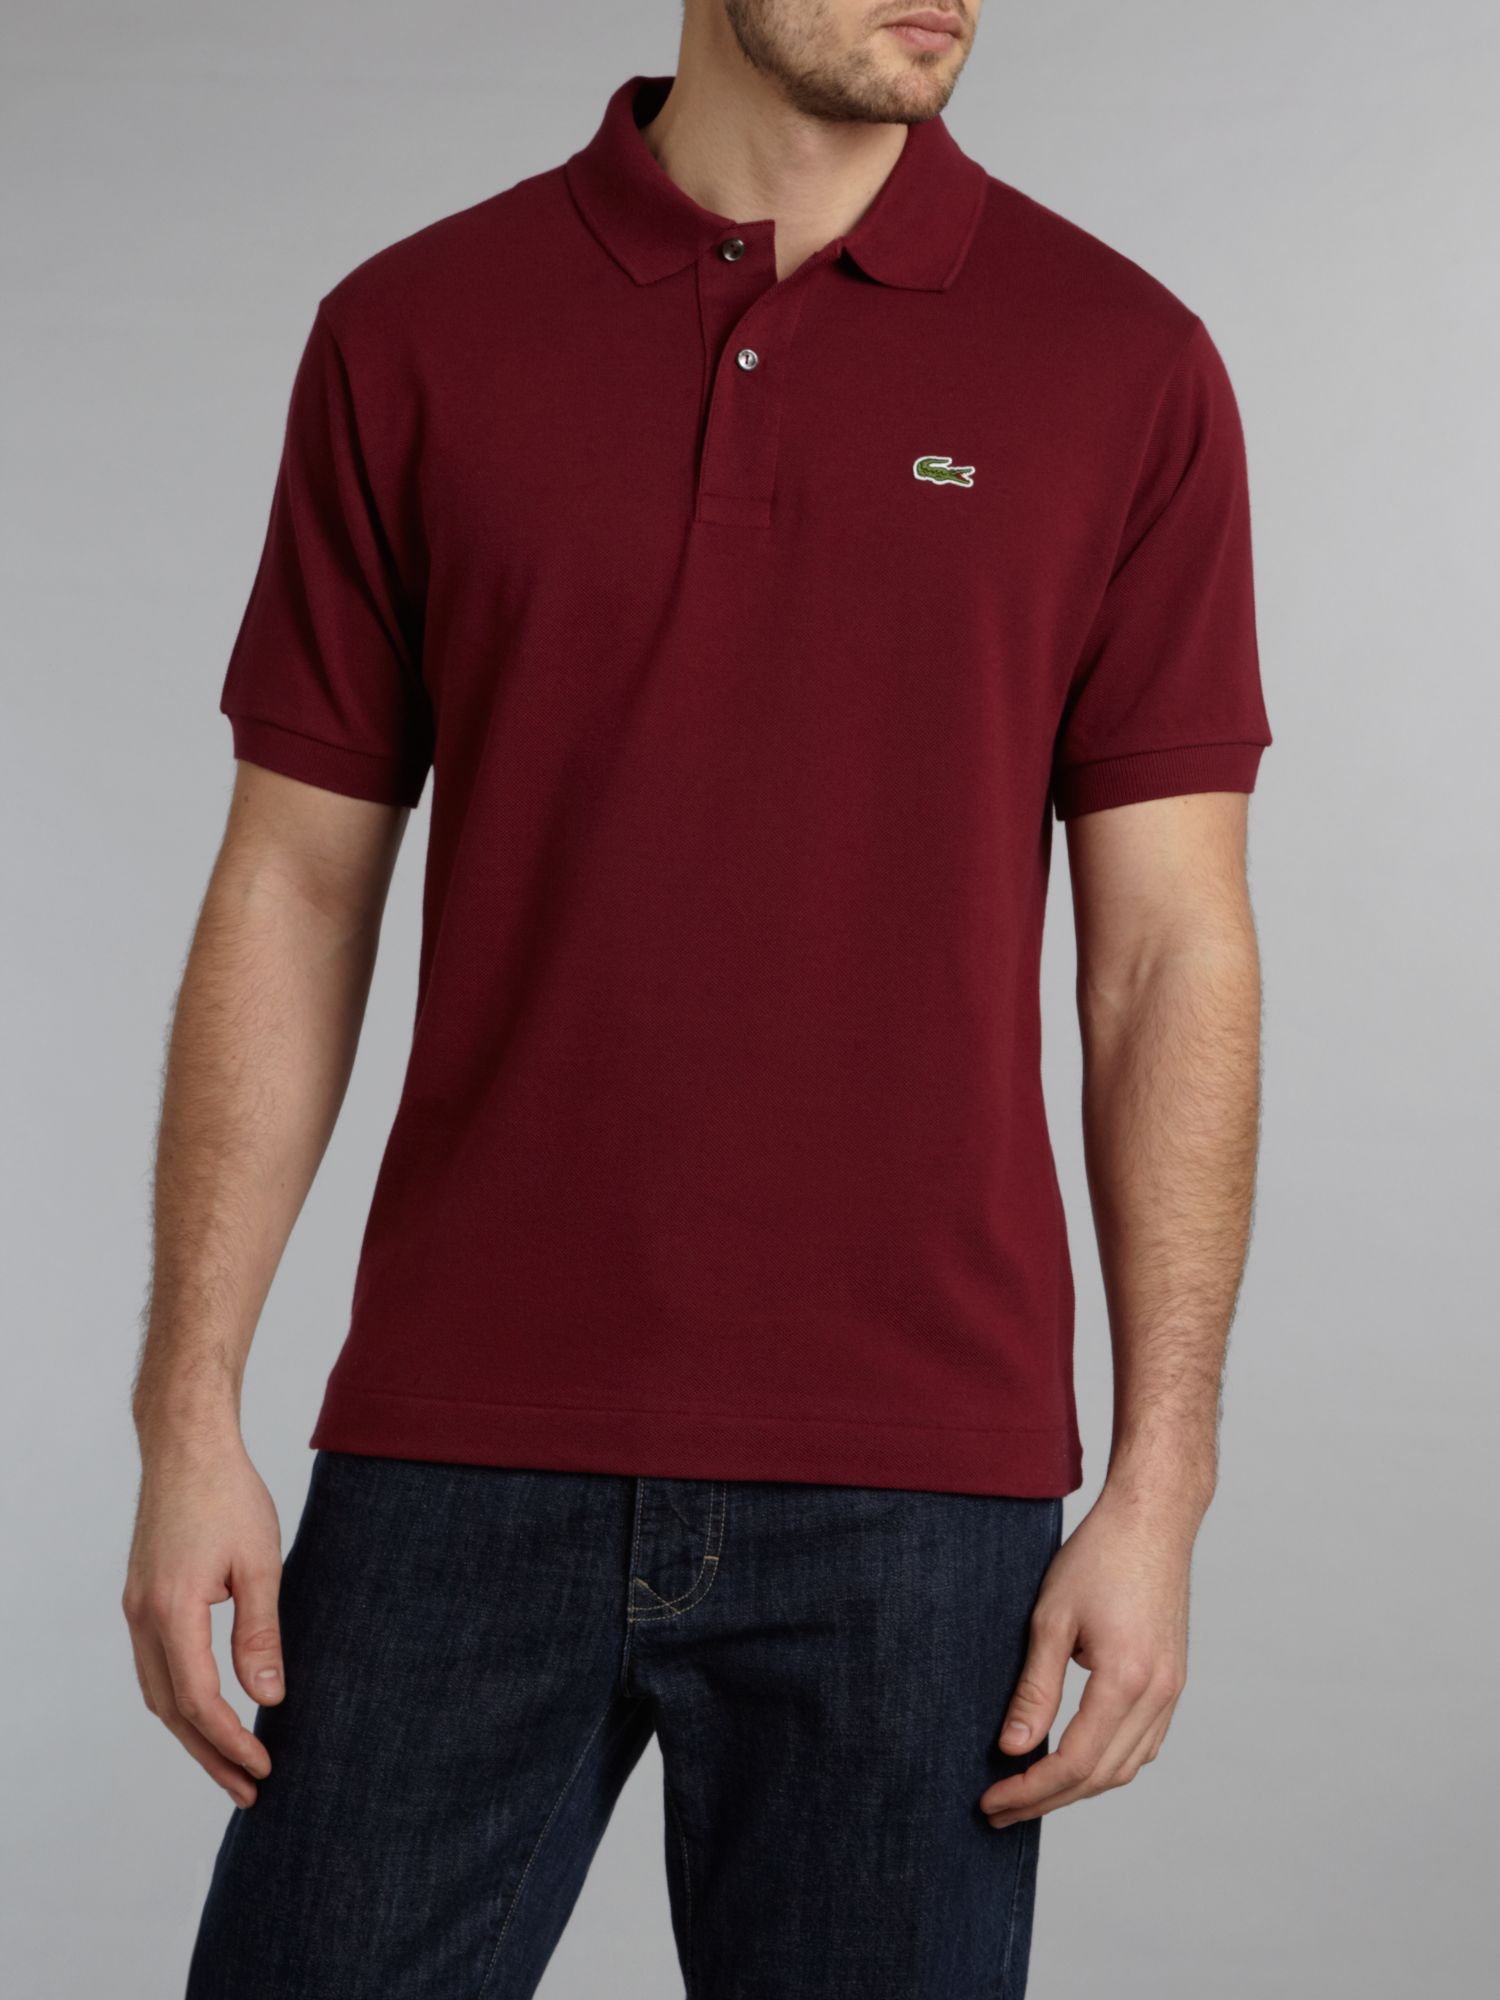 Lacoste Classic Fitted Polo Shirt in Burgundy (Red) for Men - Lyst